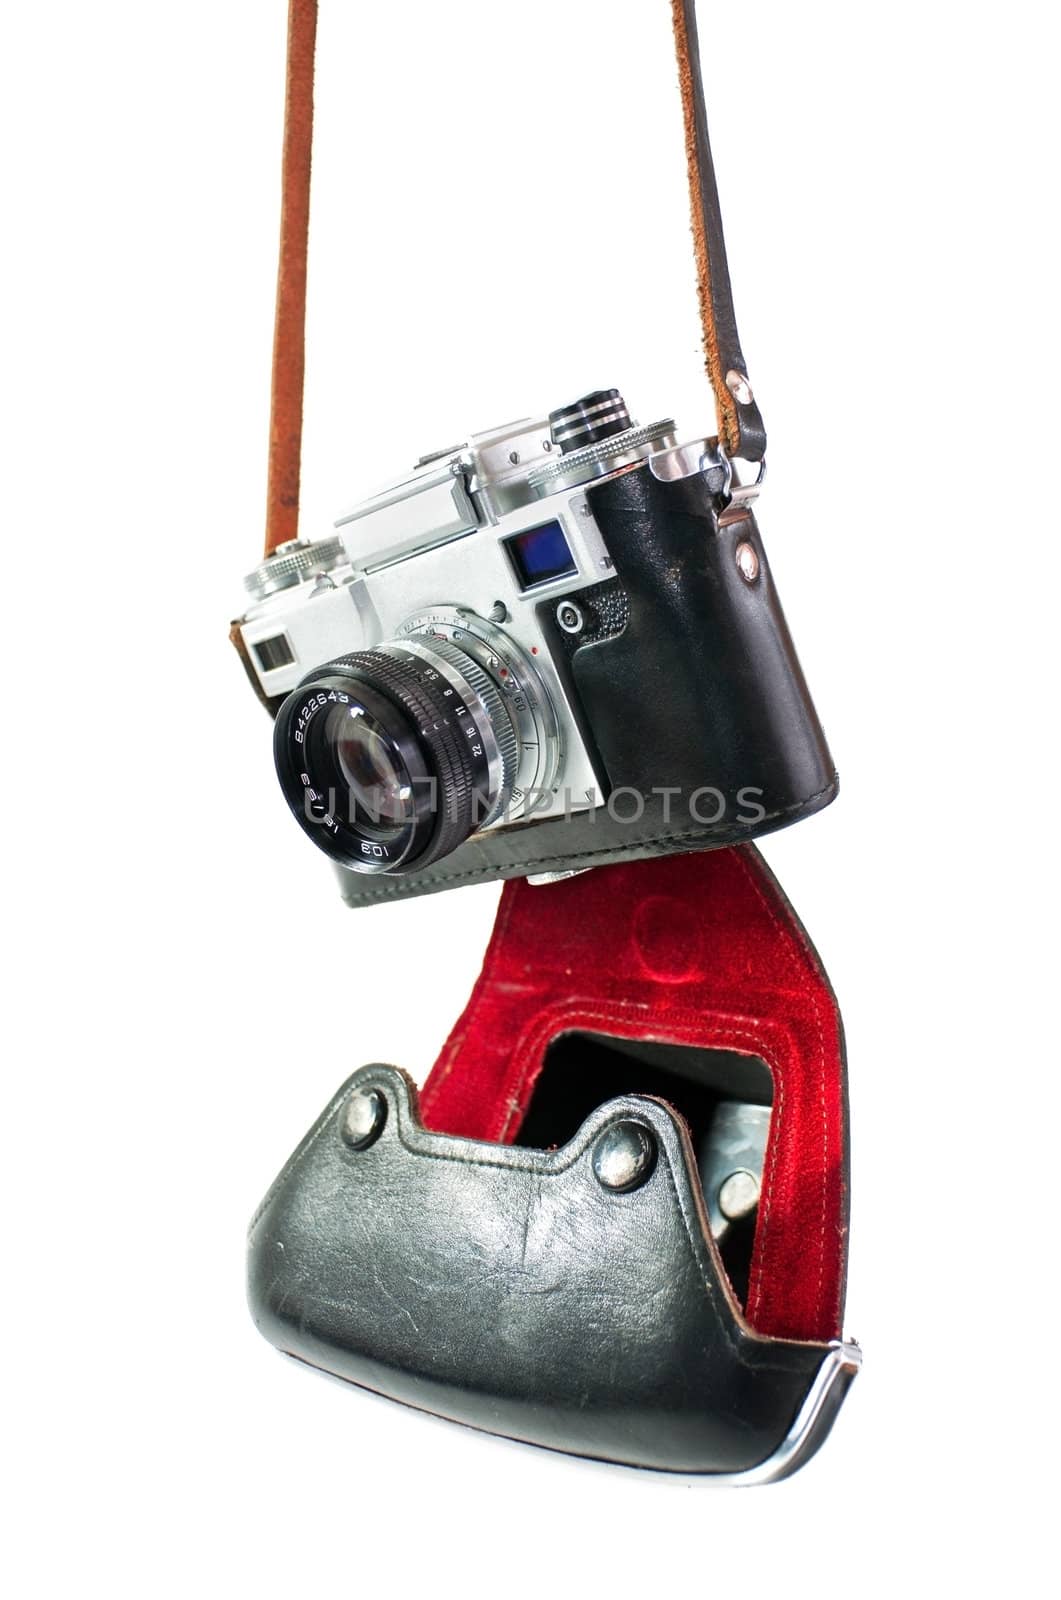 retro camera in red-black case of hanging strap isolated on a white background